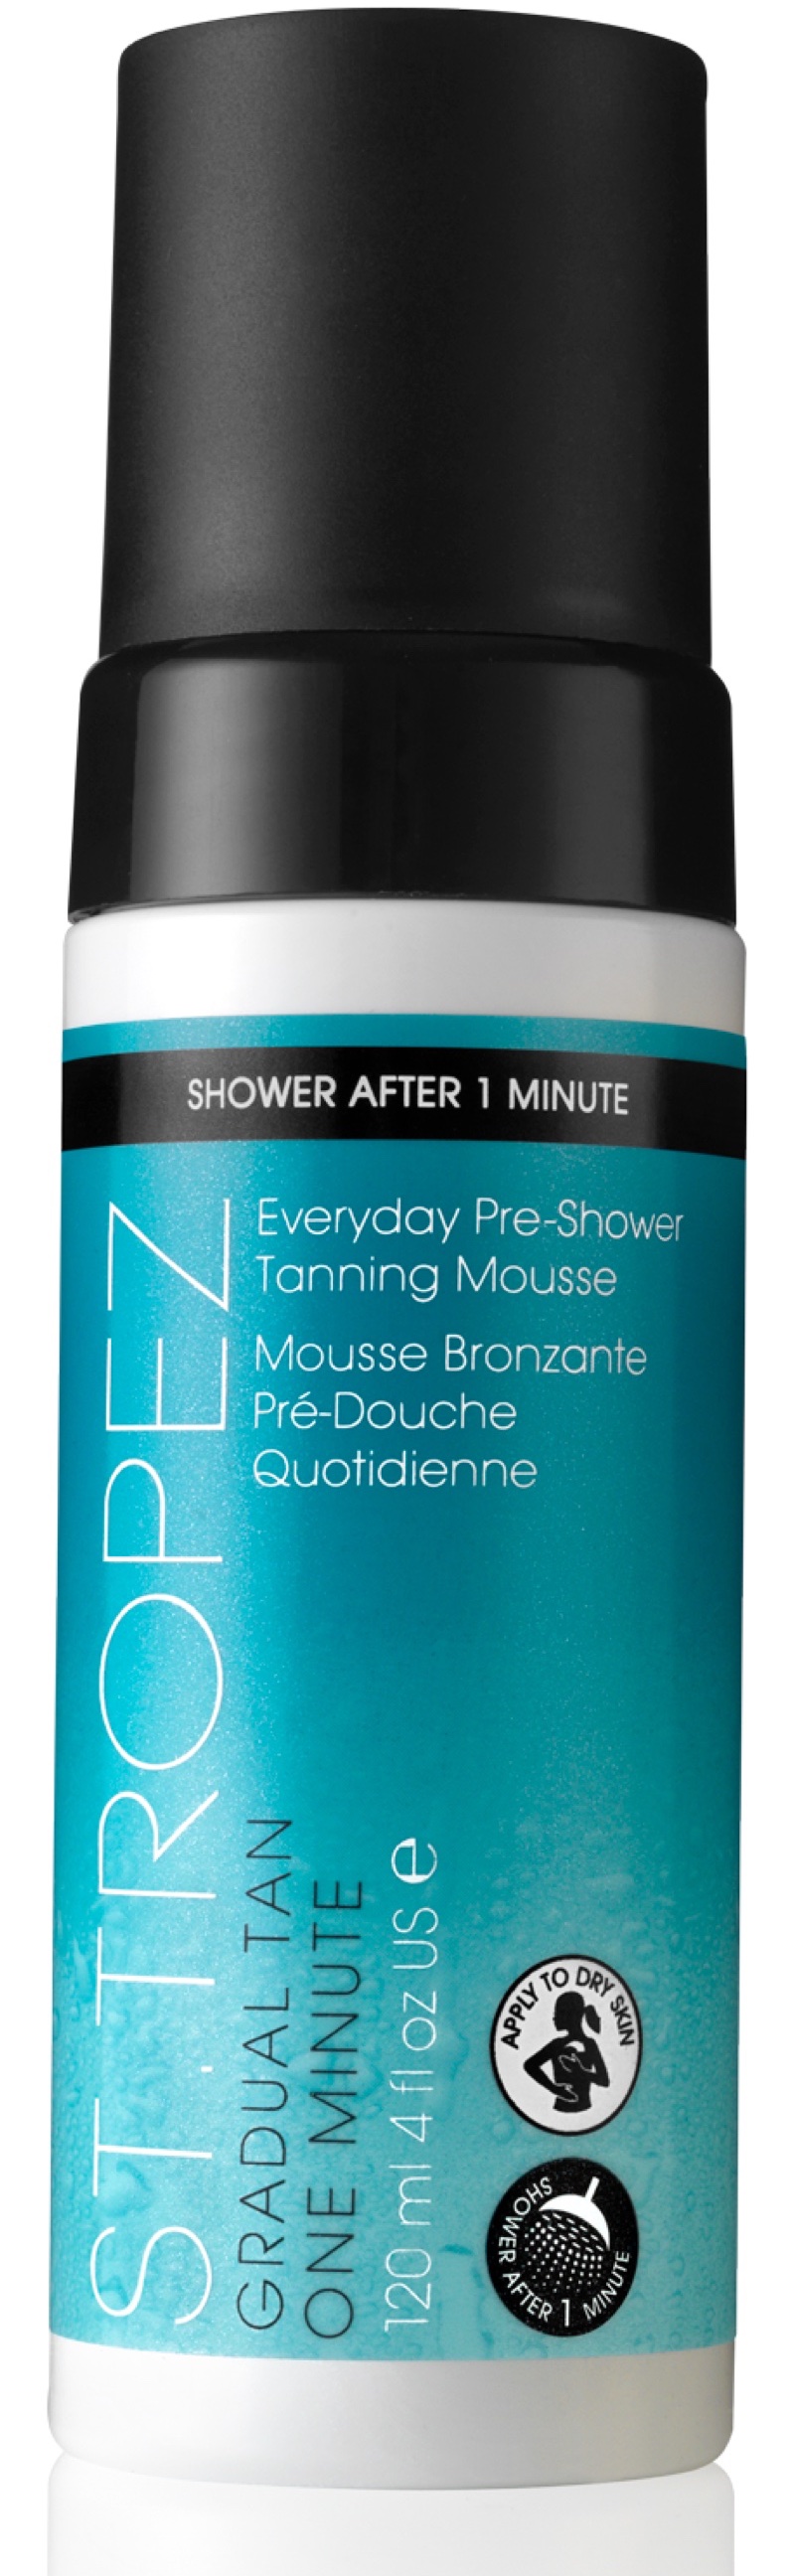 St. Tropez introduces its first pre-tanning mousse 